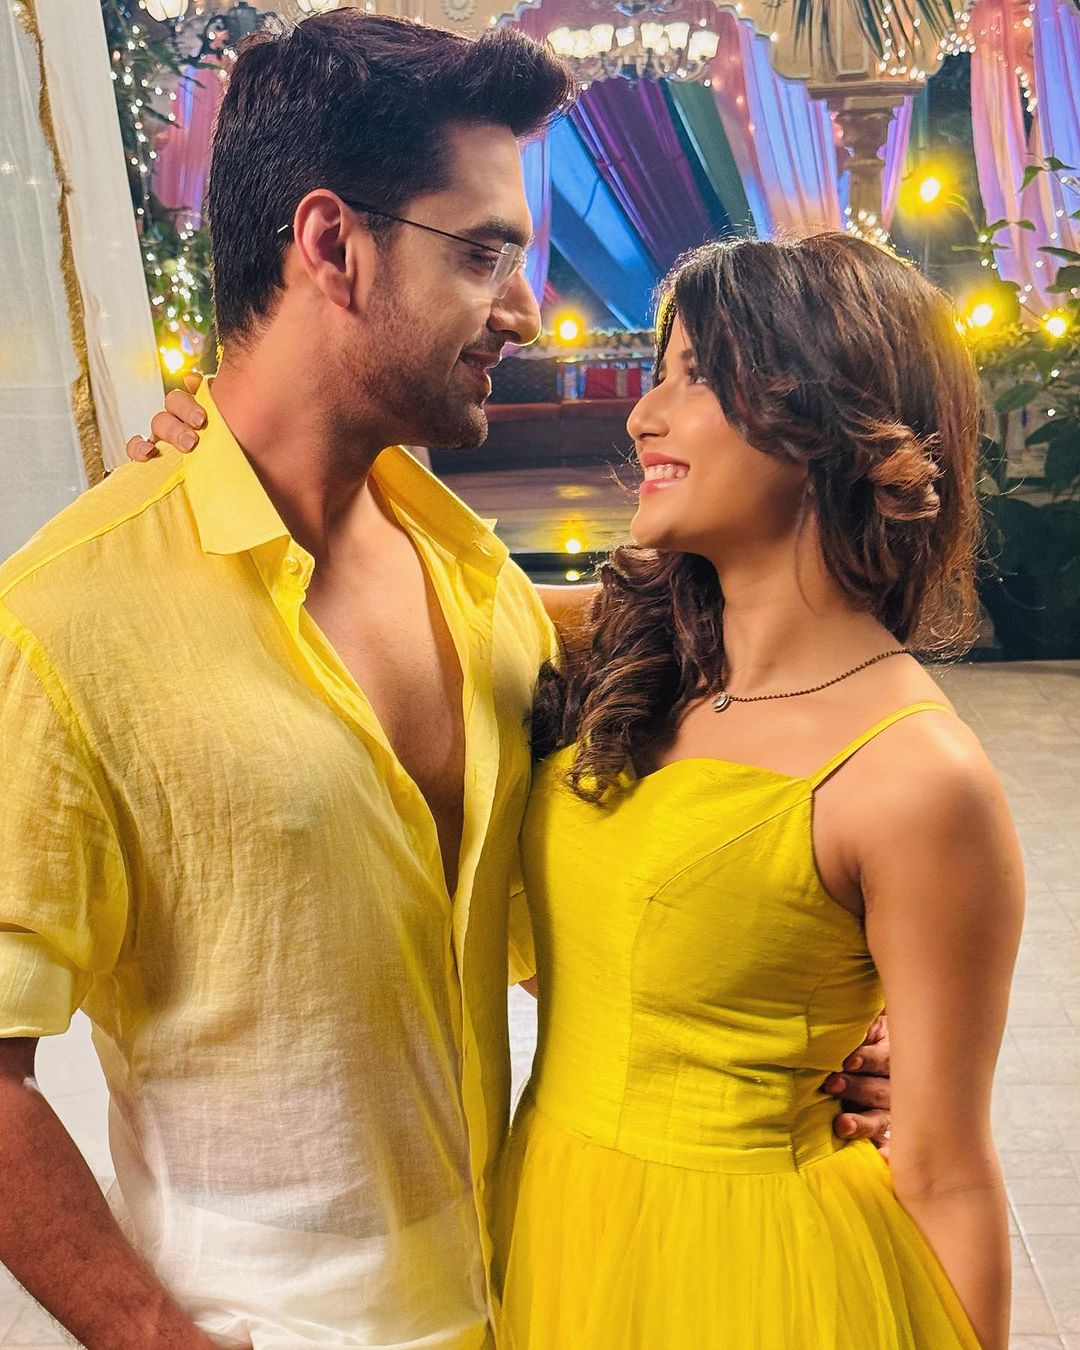 Yeh Rishta Kya Kehlata Hai: The Lead Actor from Rajan Shah’s Show Shared His working experience and Off Scene Bond with a talented Actress